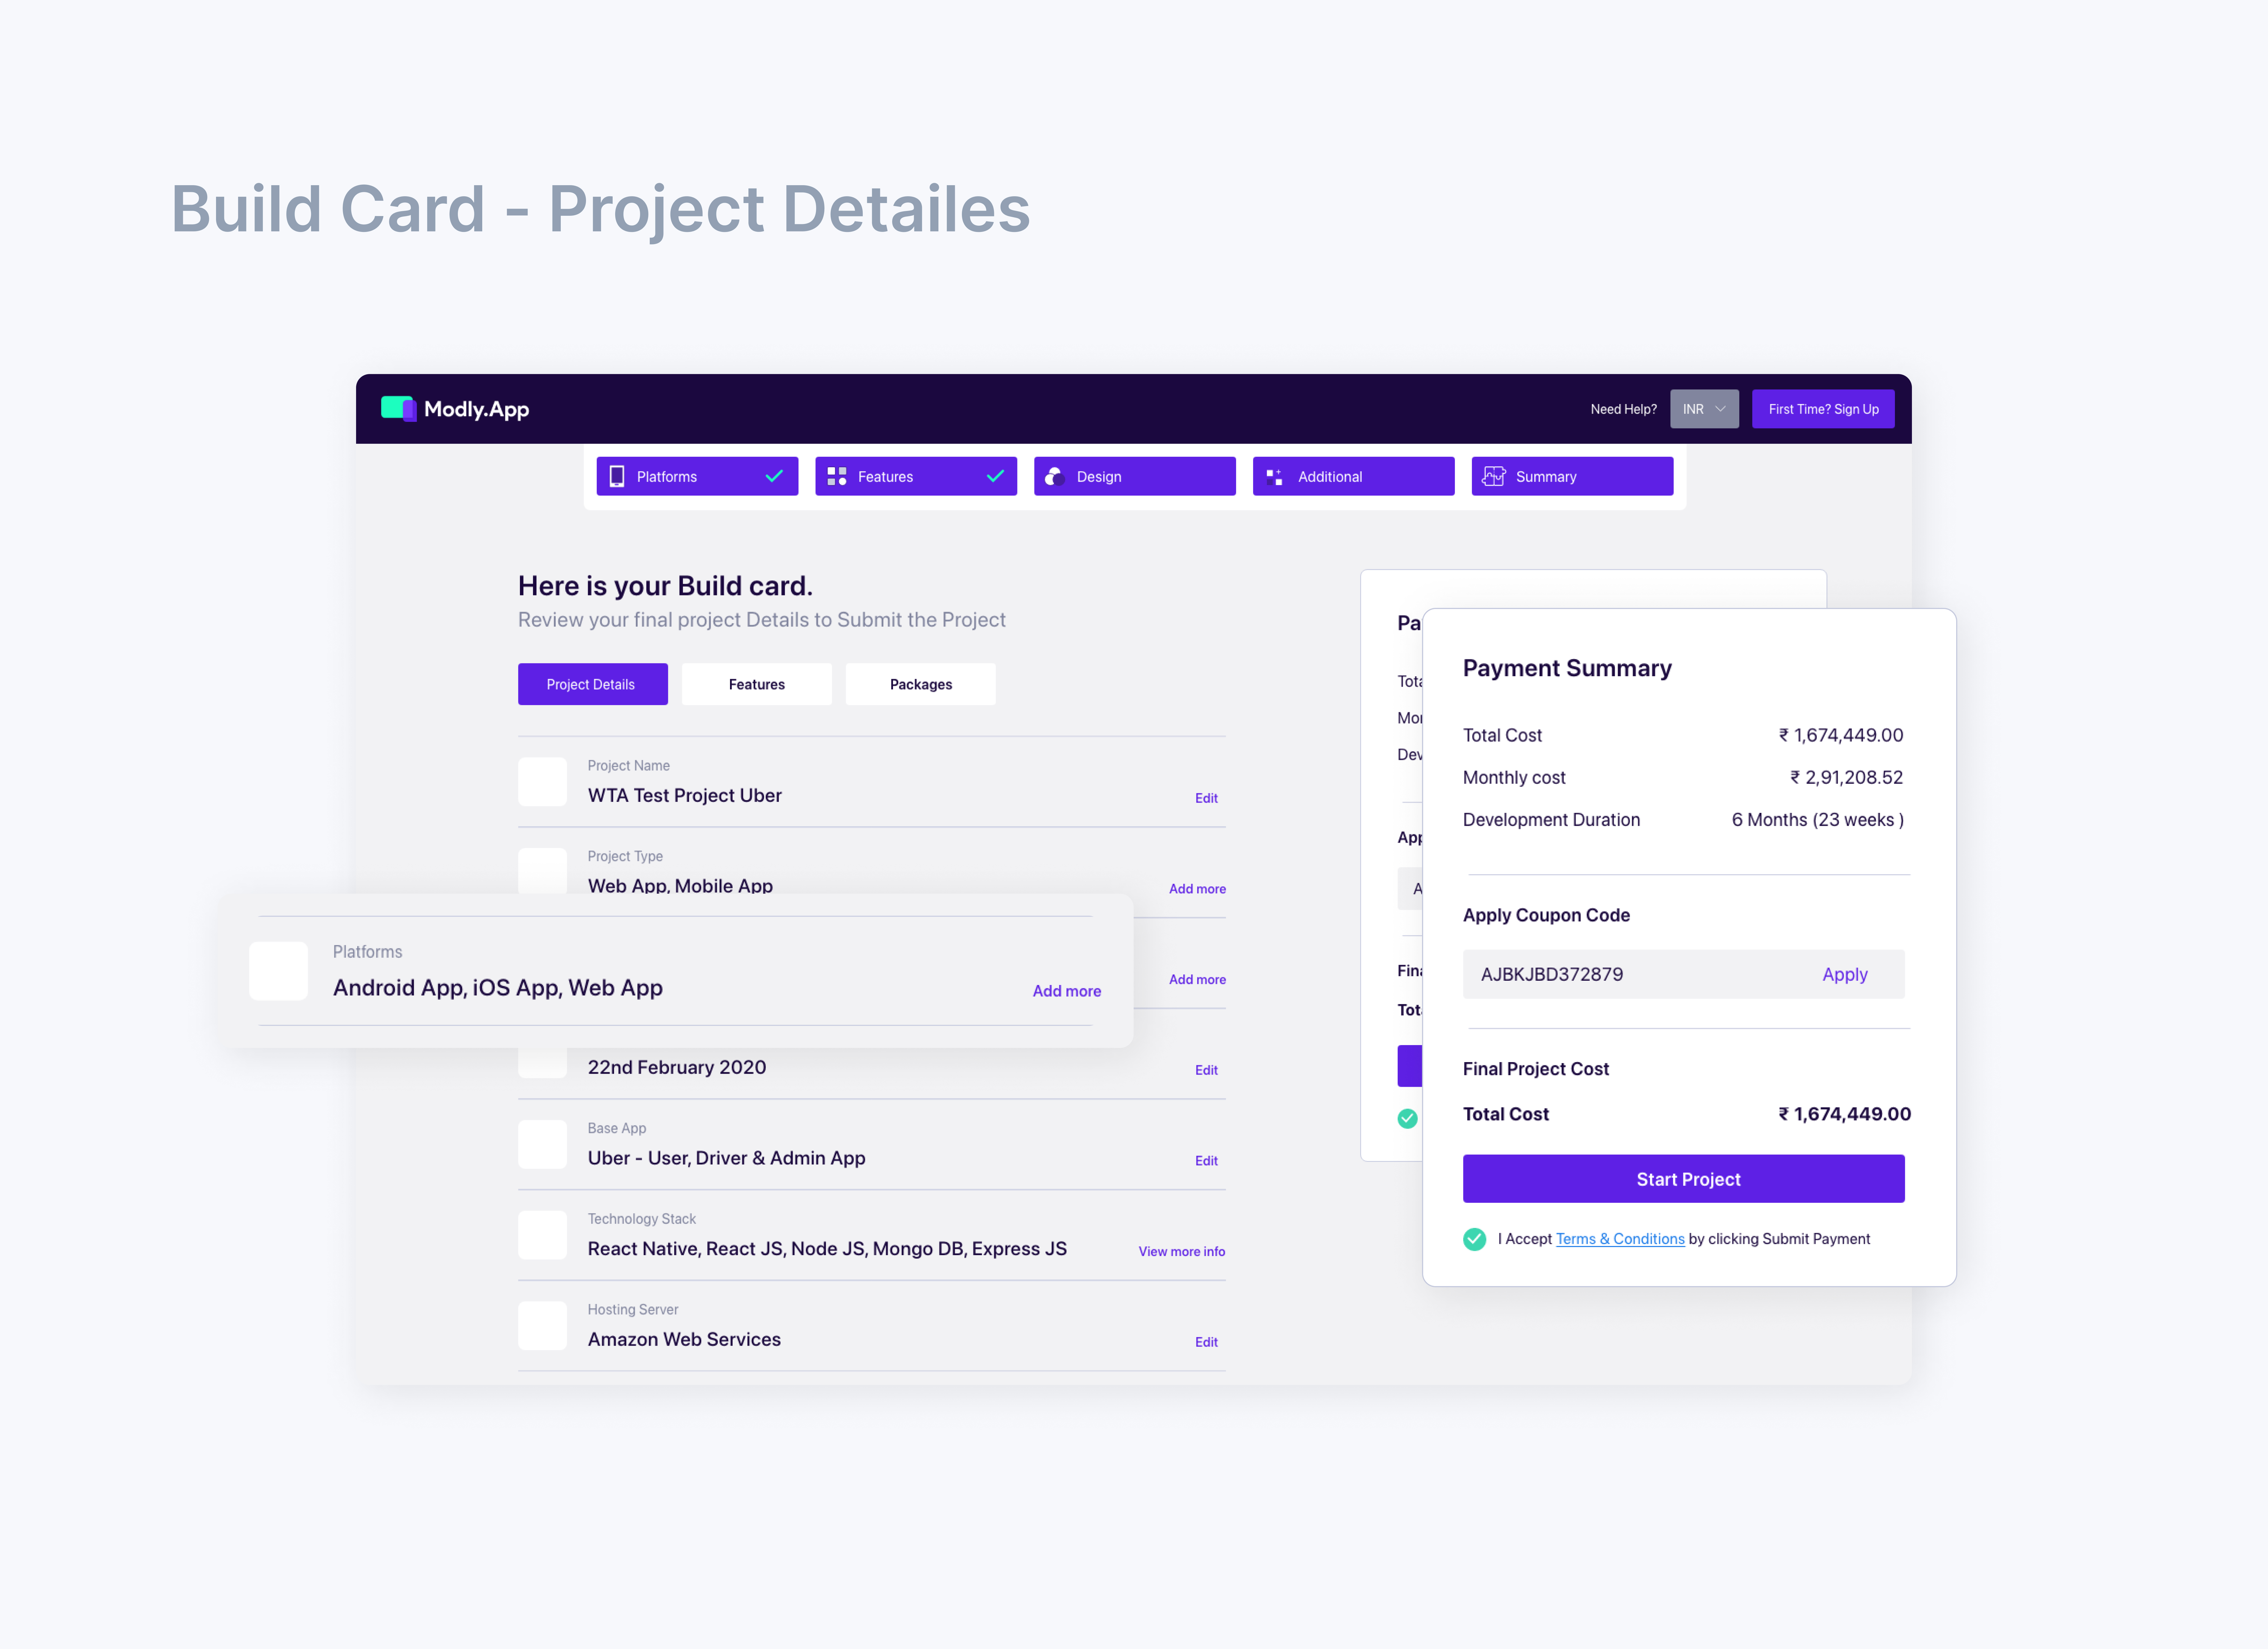 10.Build-Card-Project-Detailes